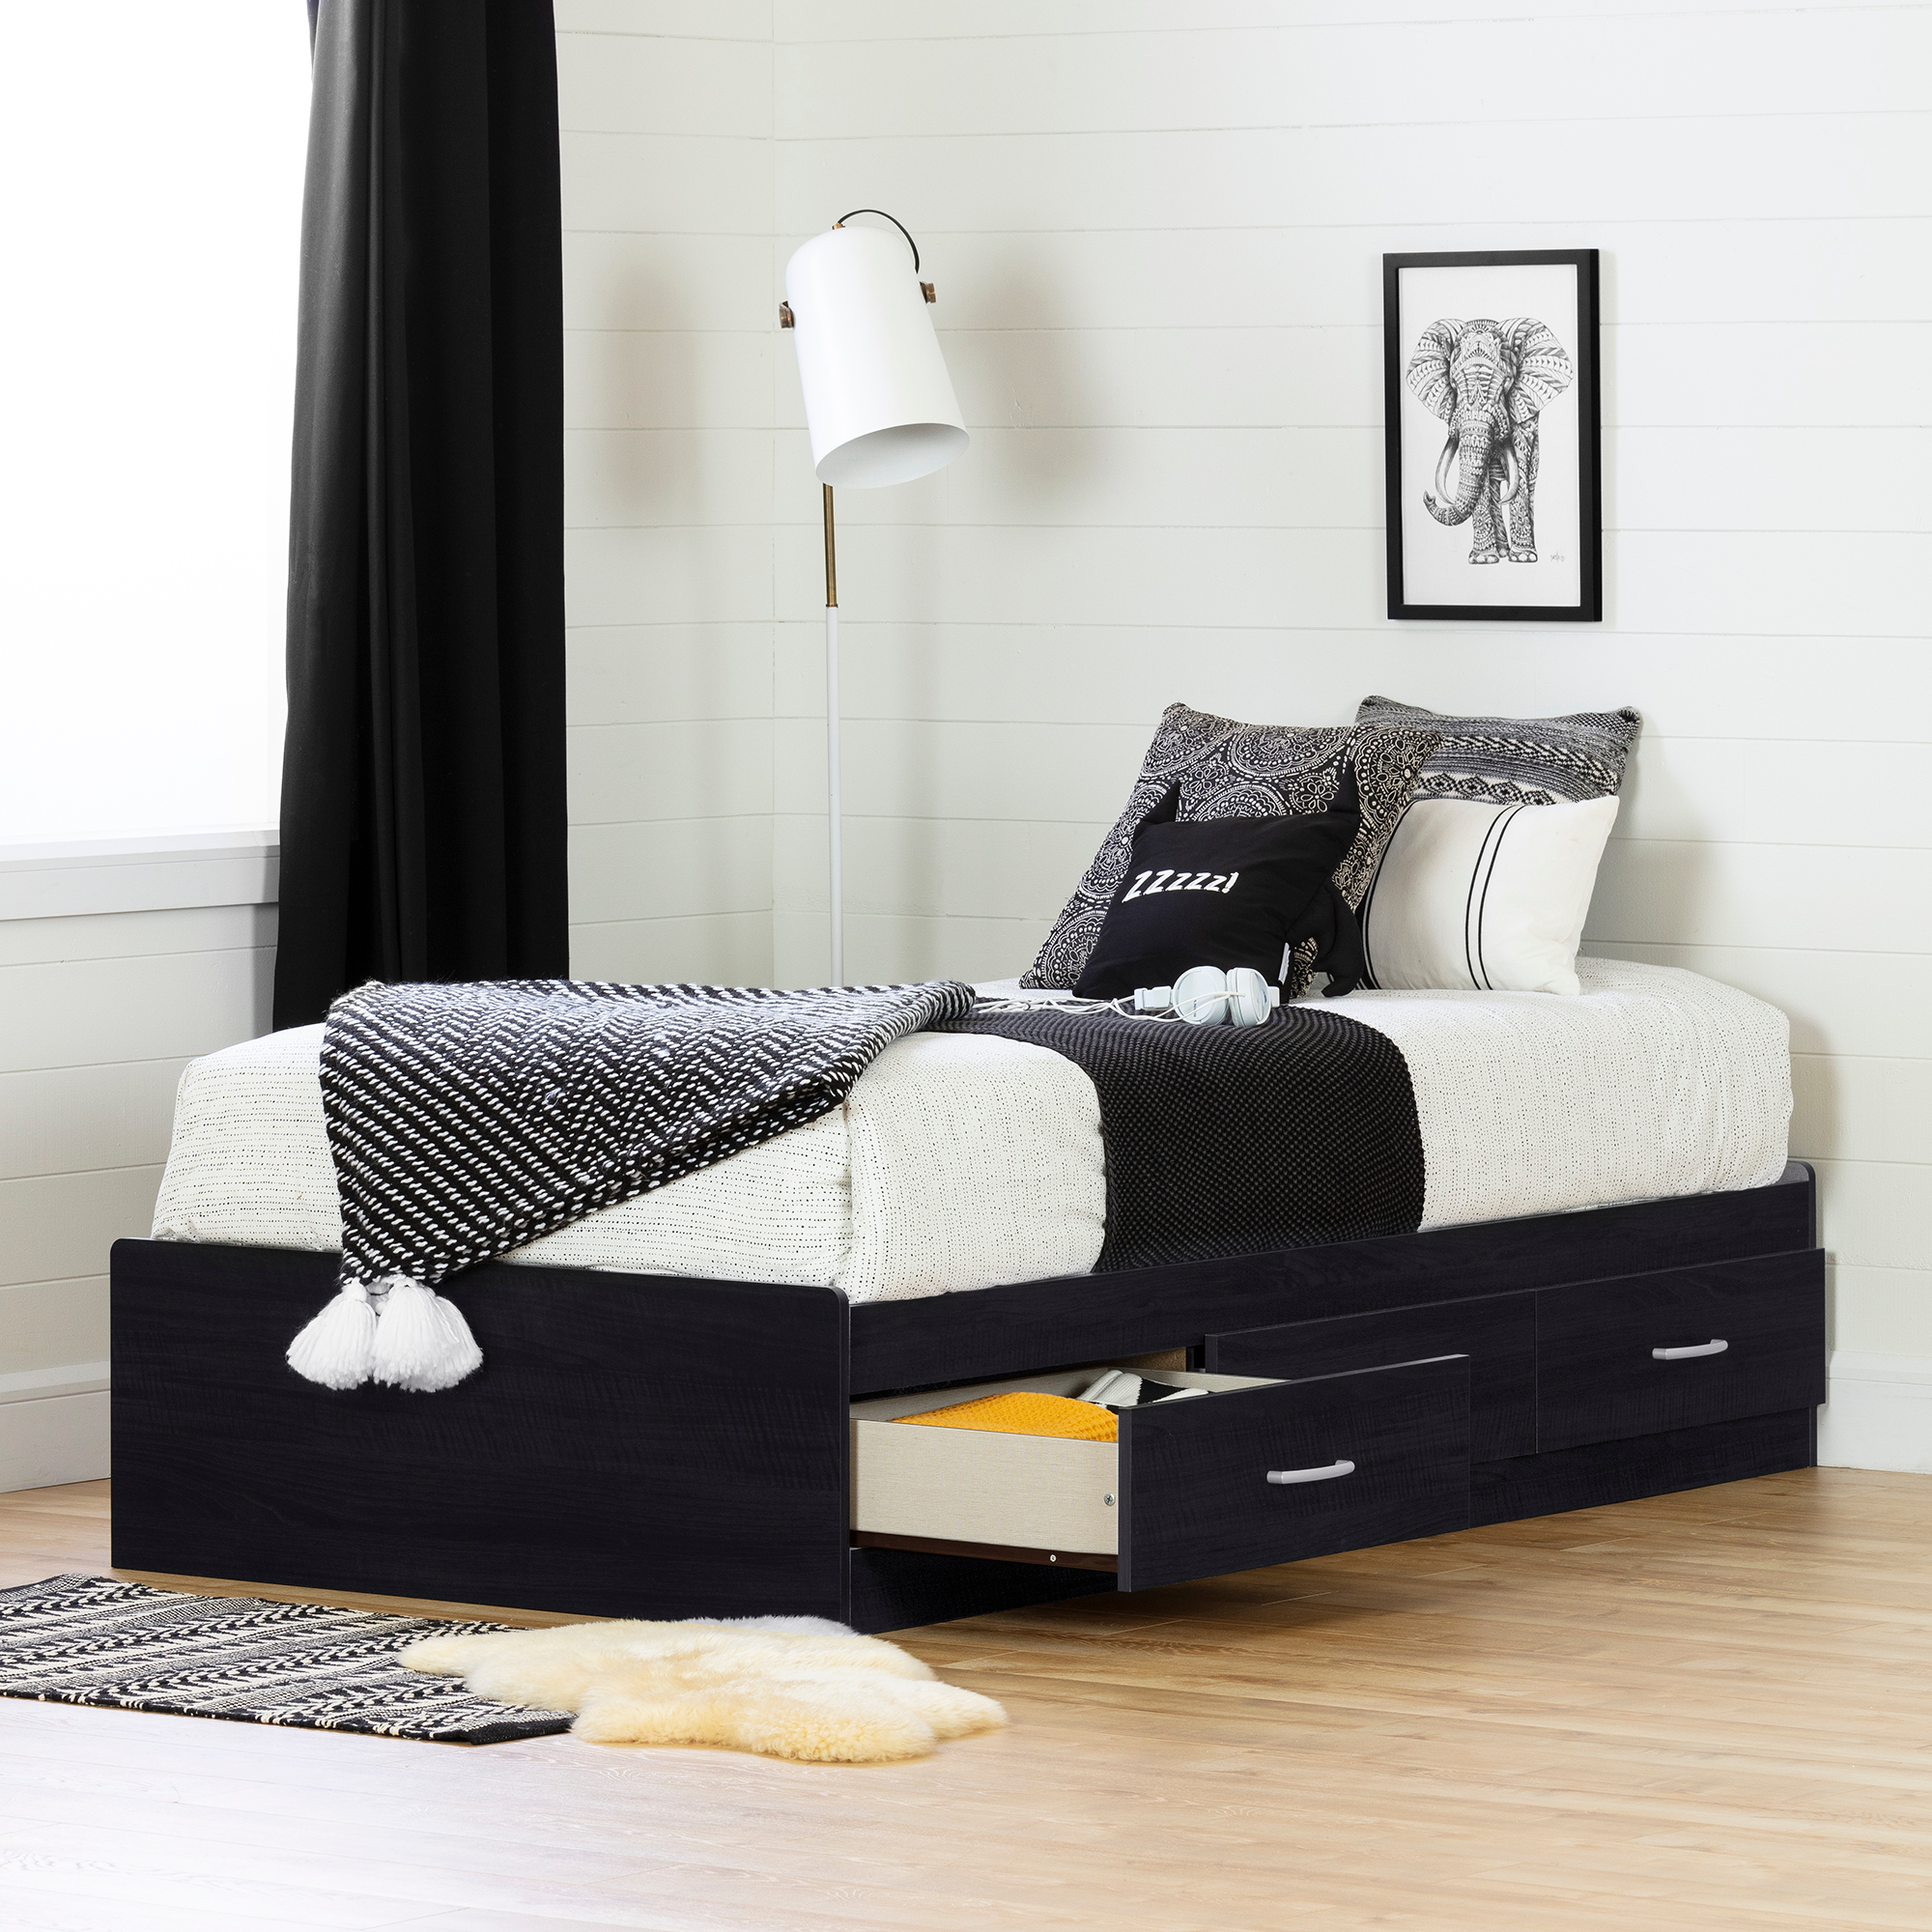 South Shore Cosmos 3-Drawer Storage Bed, Twin Black Onyx - image 1 of 9